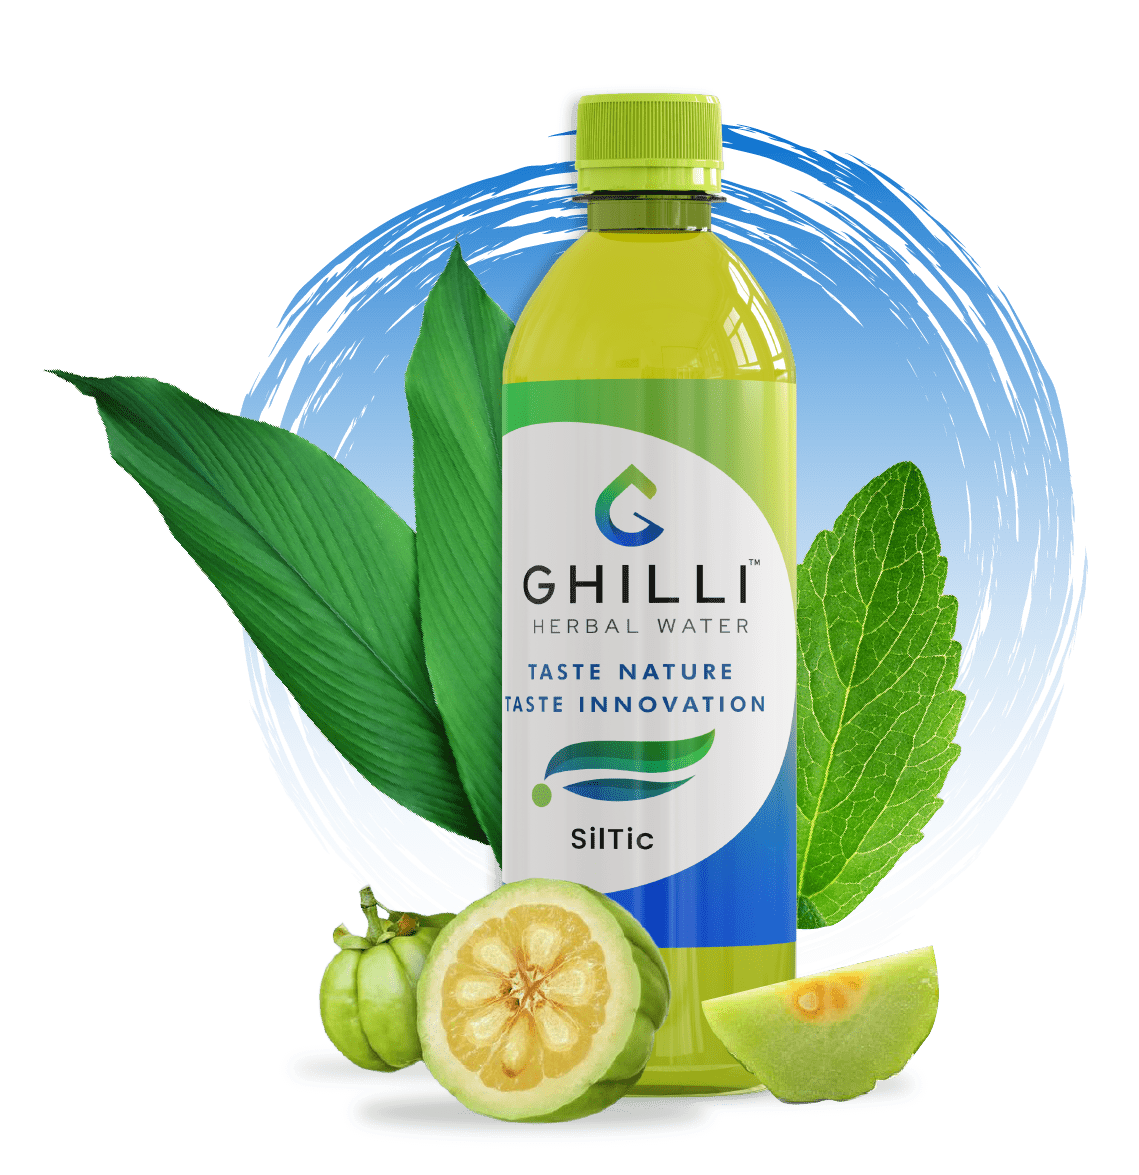 Home - Ghilli Hearbal Water